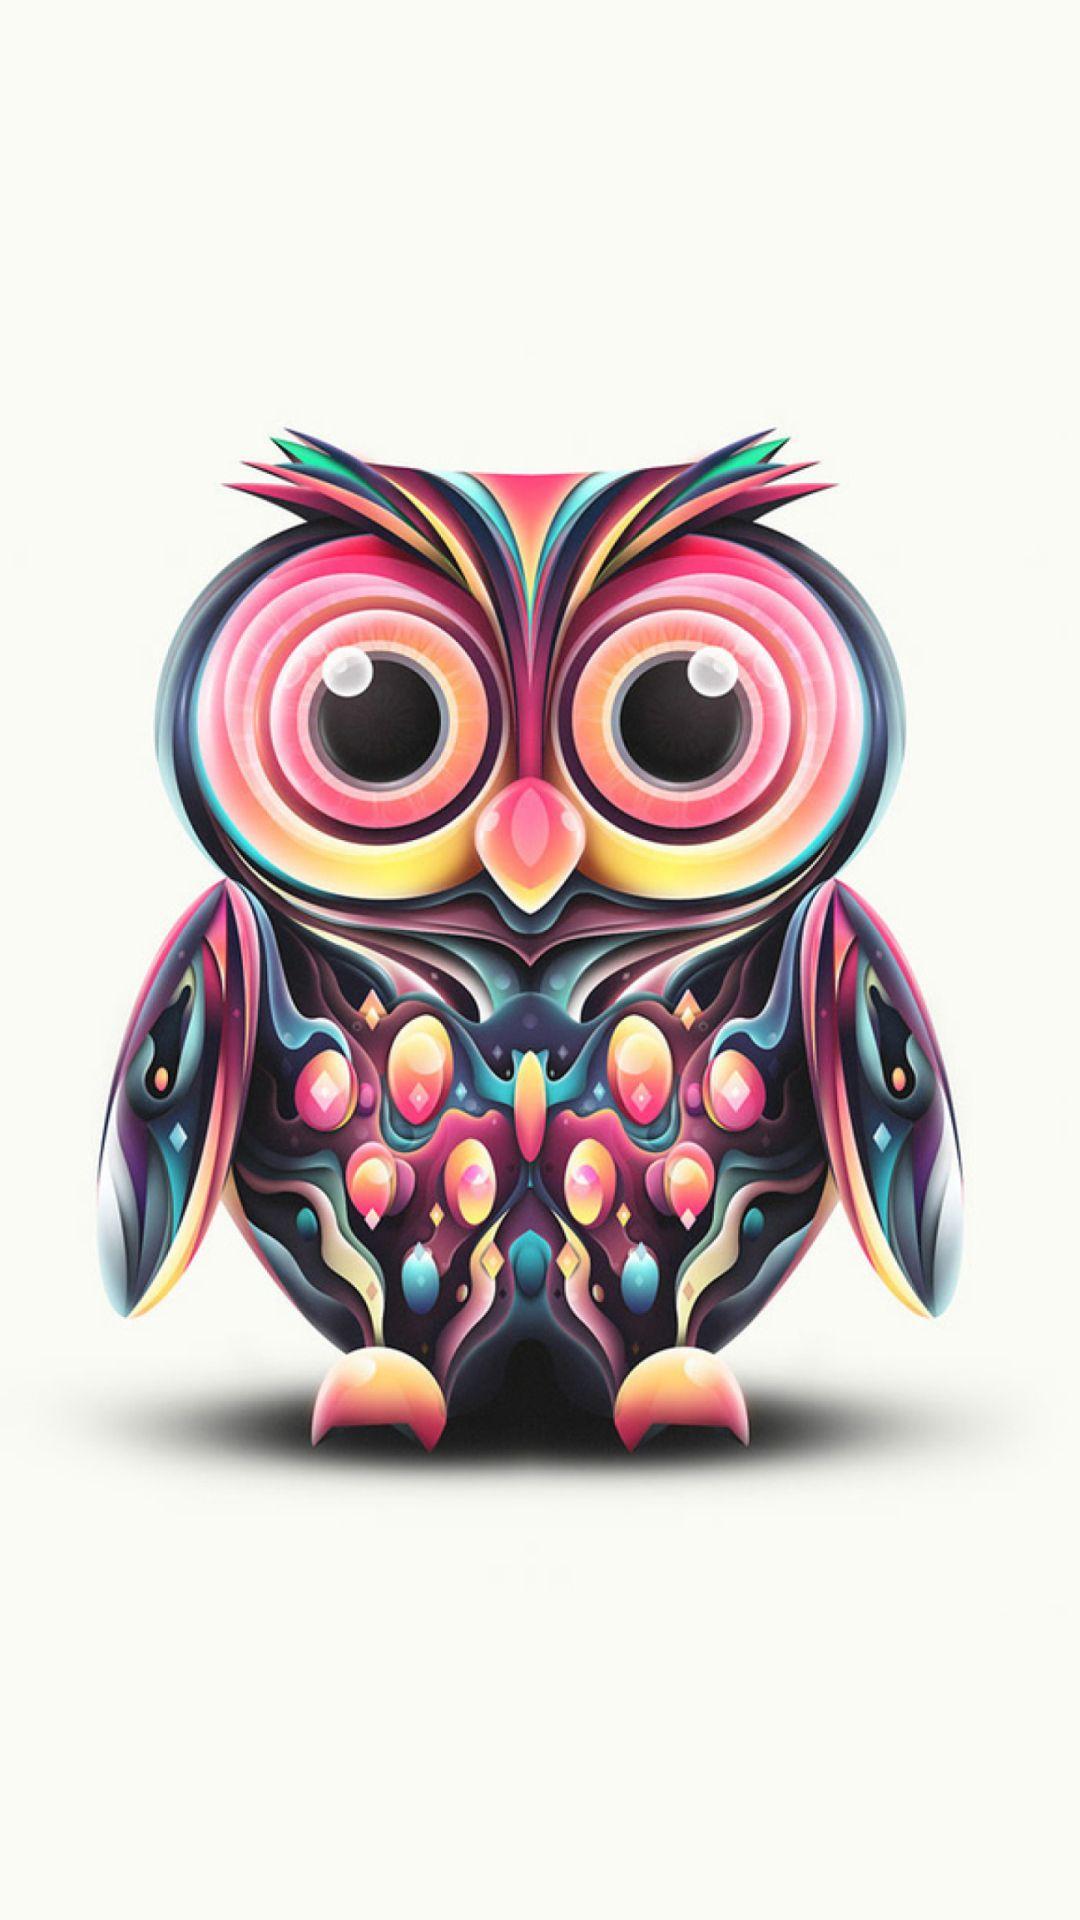 Cute Owl Wallpaper for Android Free Download. file